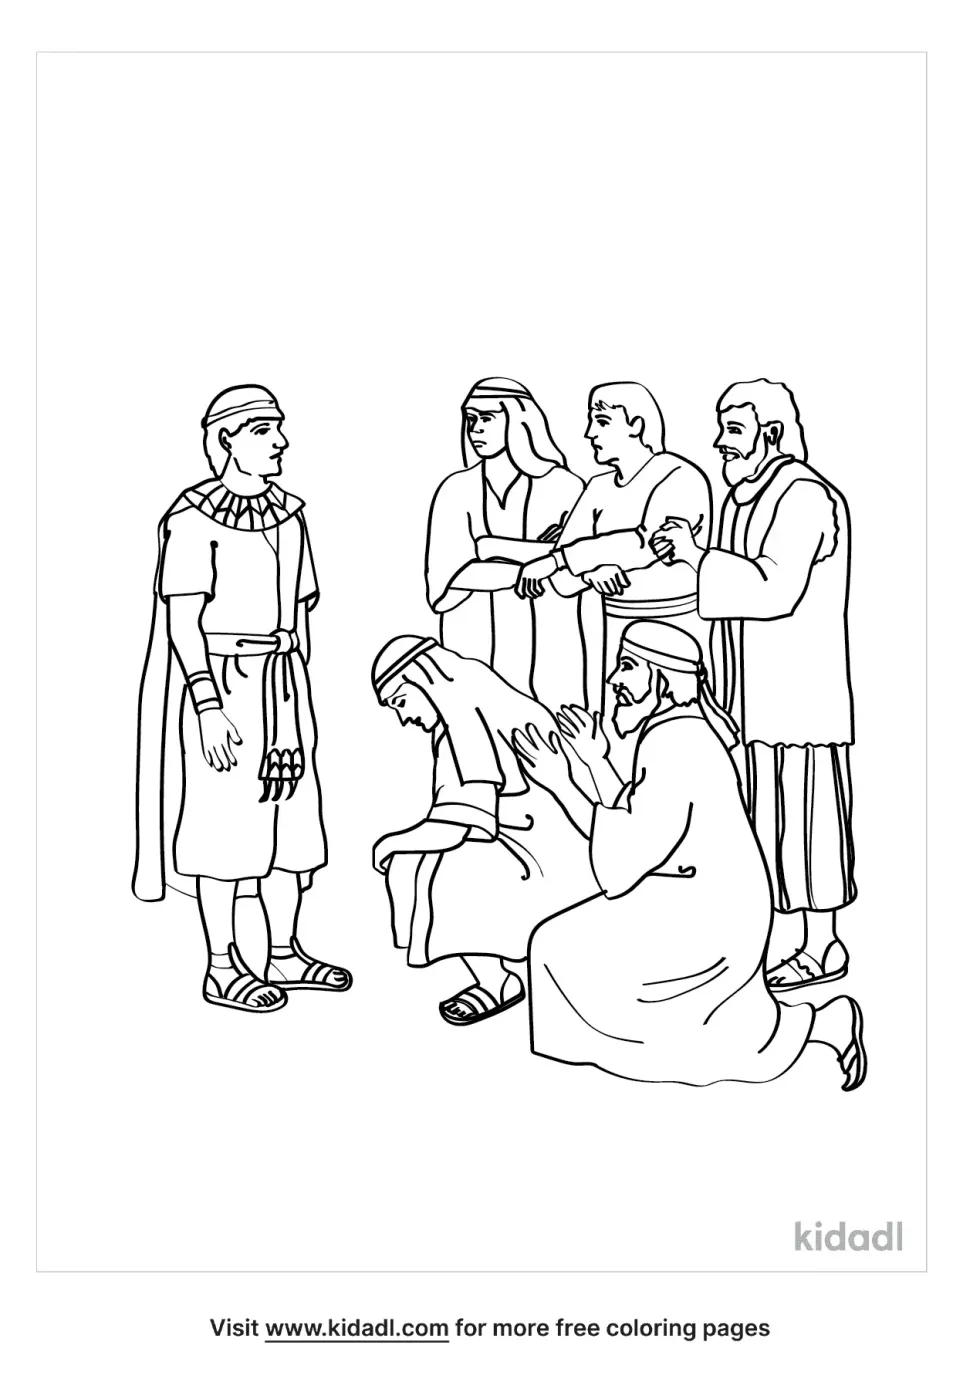 Jephthah And His Brothers Coloring Page